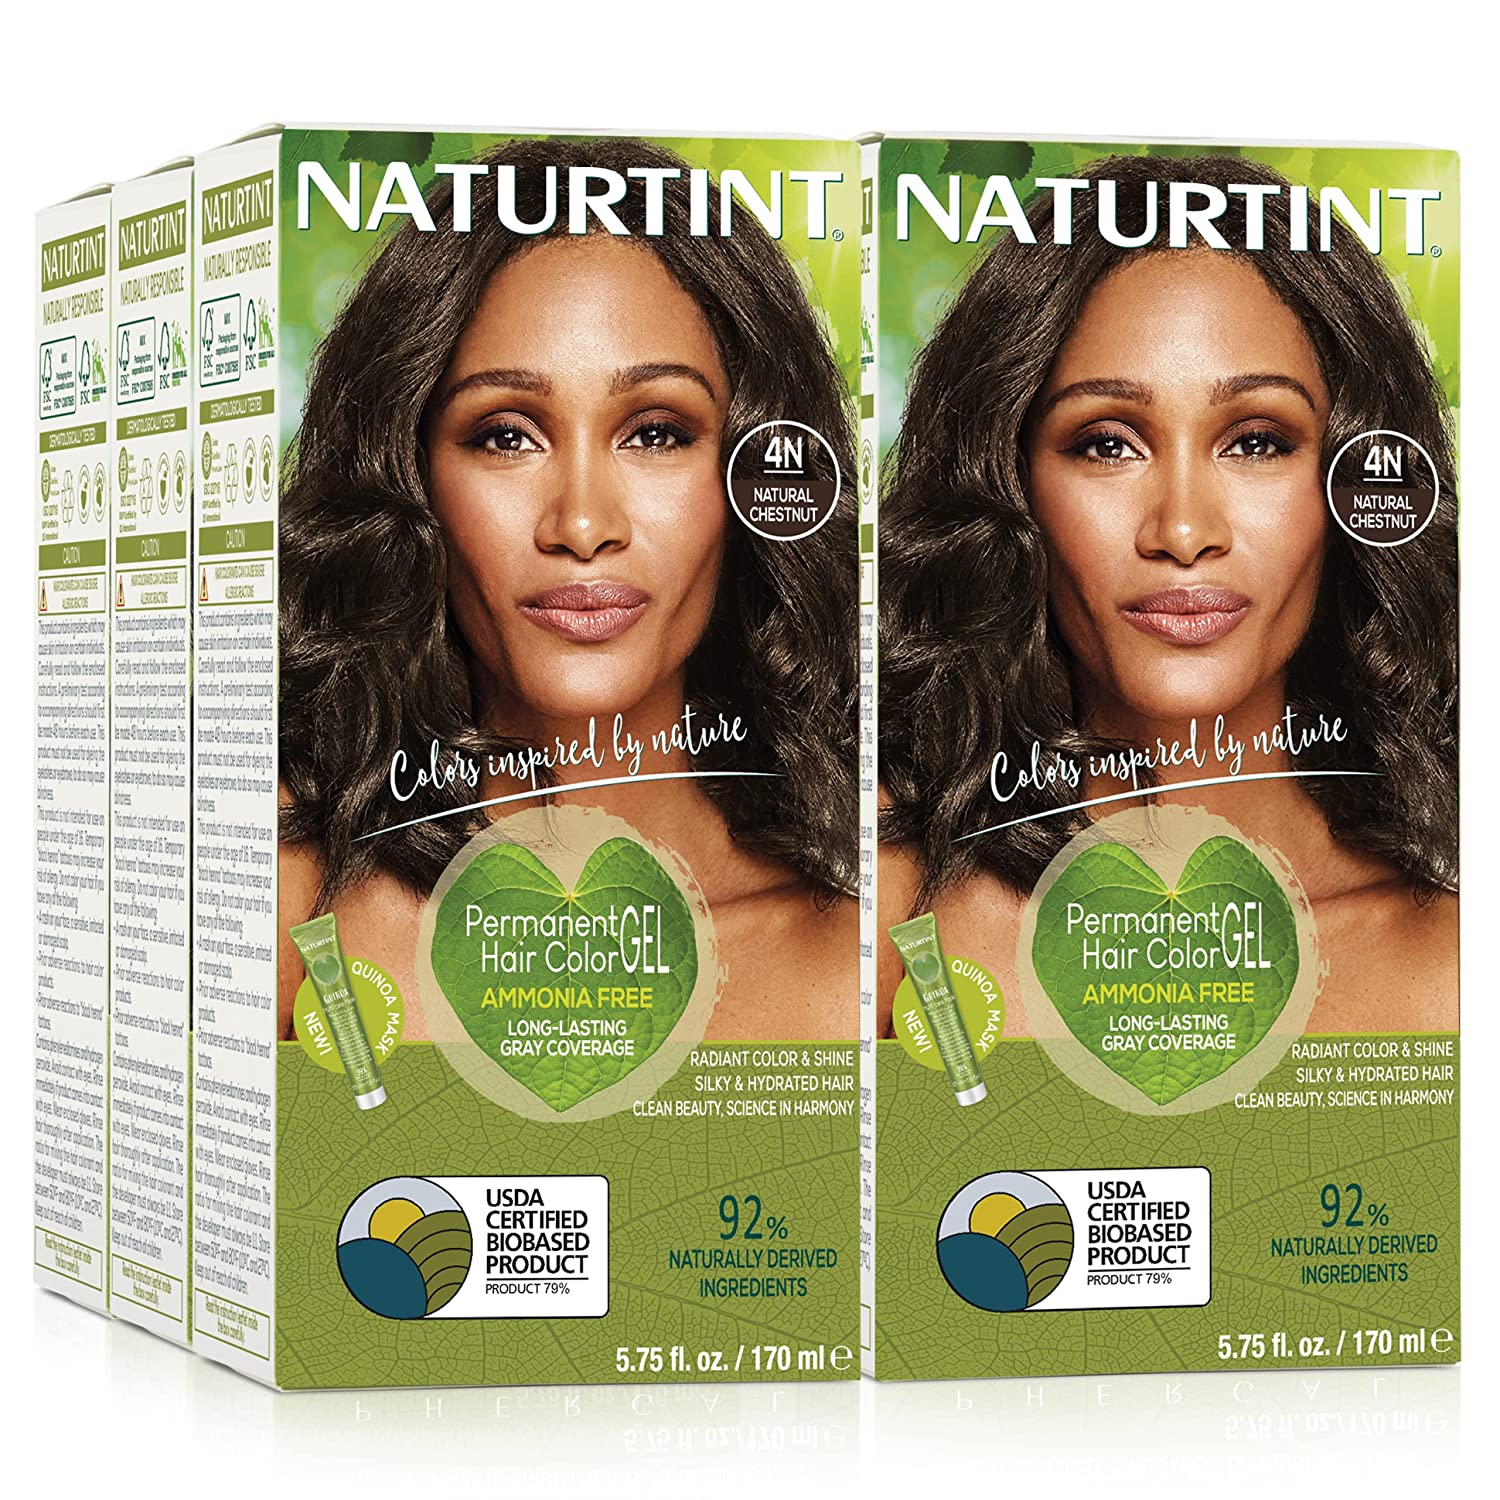 Review of Naturtint Permanent Hair Color 4N Natural Chestnut (Pack of 6)